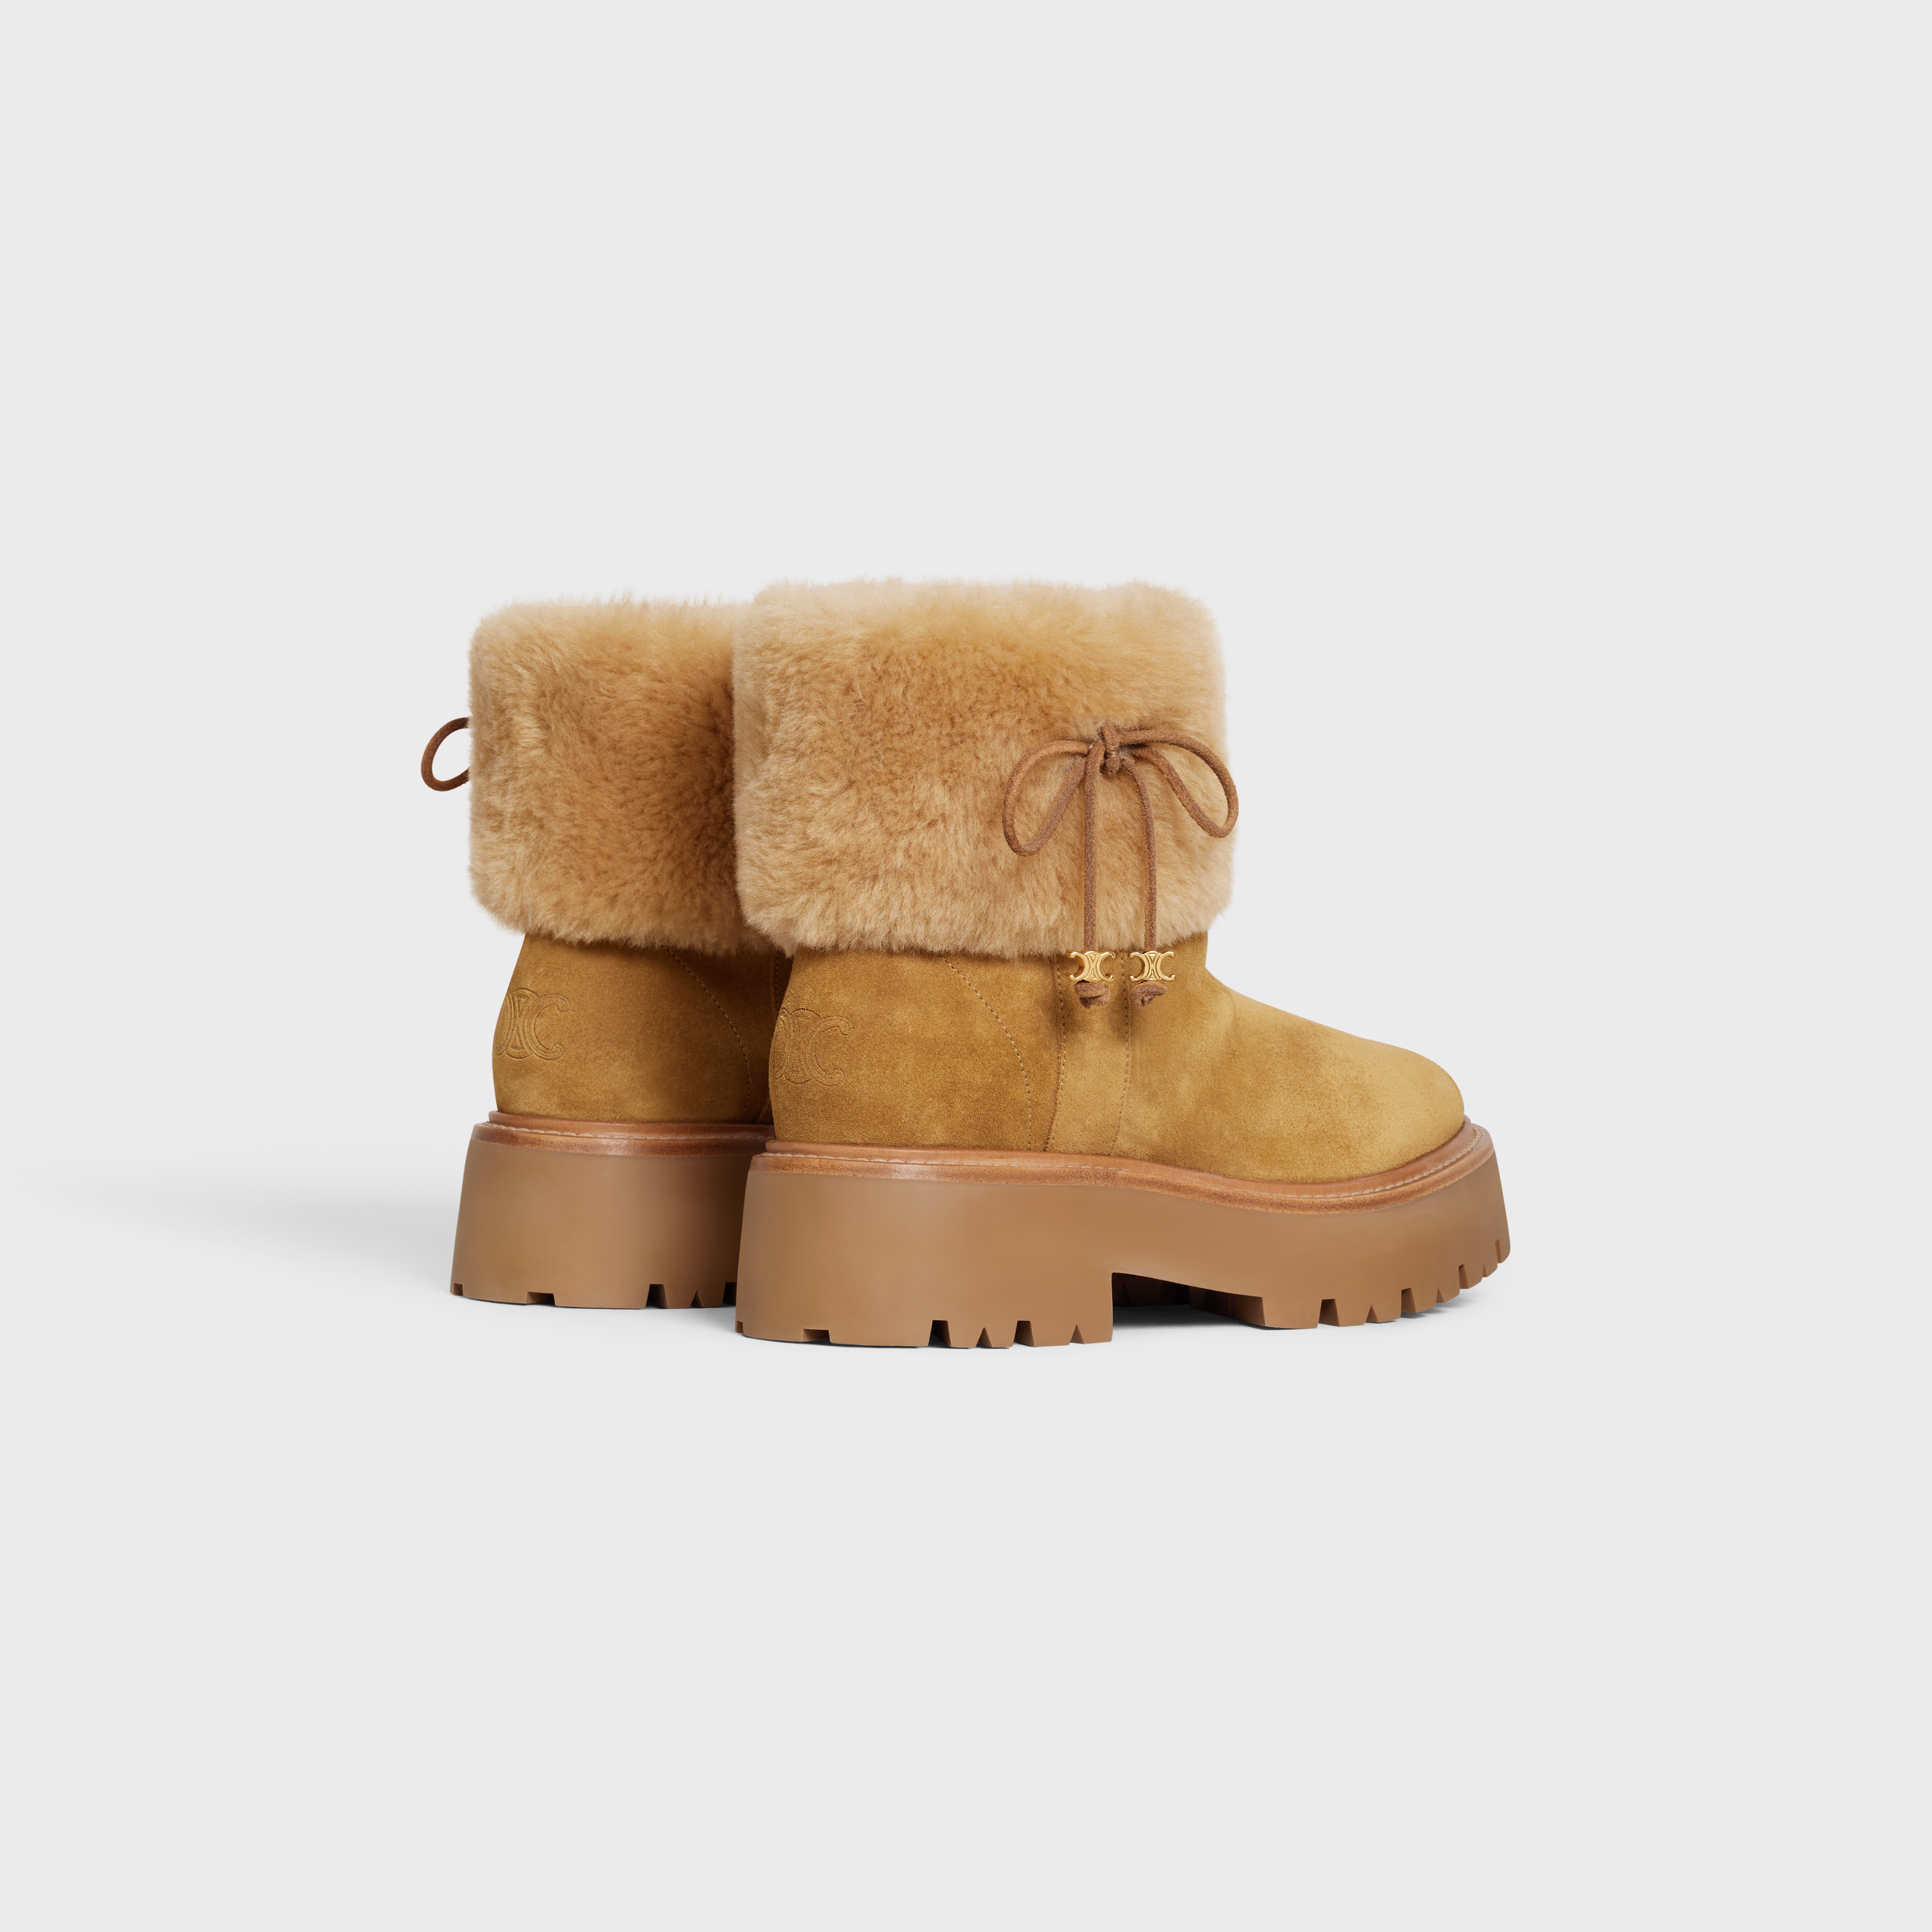 CELINE BULKY CROPPED BOOT WITH TRIOMPHE TASSELS in SUEDE CALFSKIN AND SHEARLING - 3